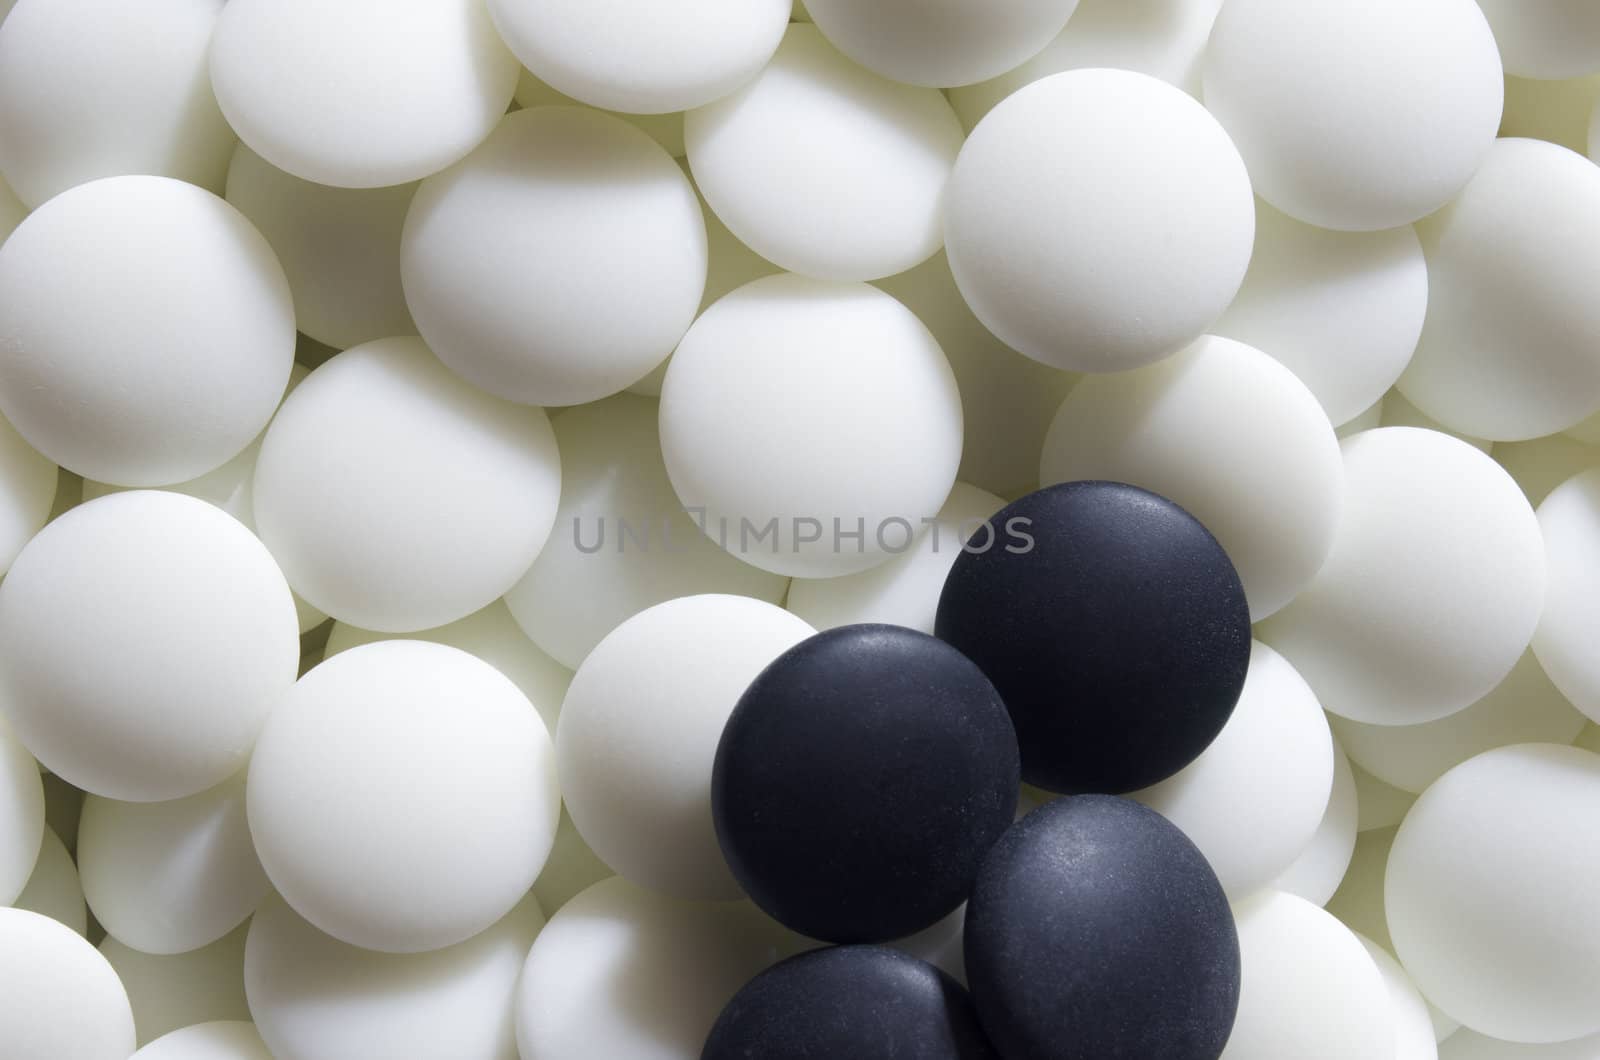 Some black go stones on a pile of white ones. Go is a traditional Asian strategic board game. It is considered to be of the oldest games in the world.